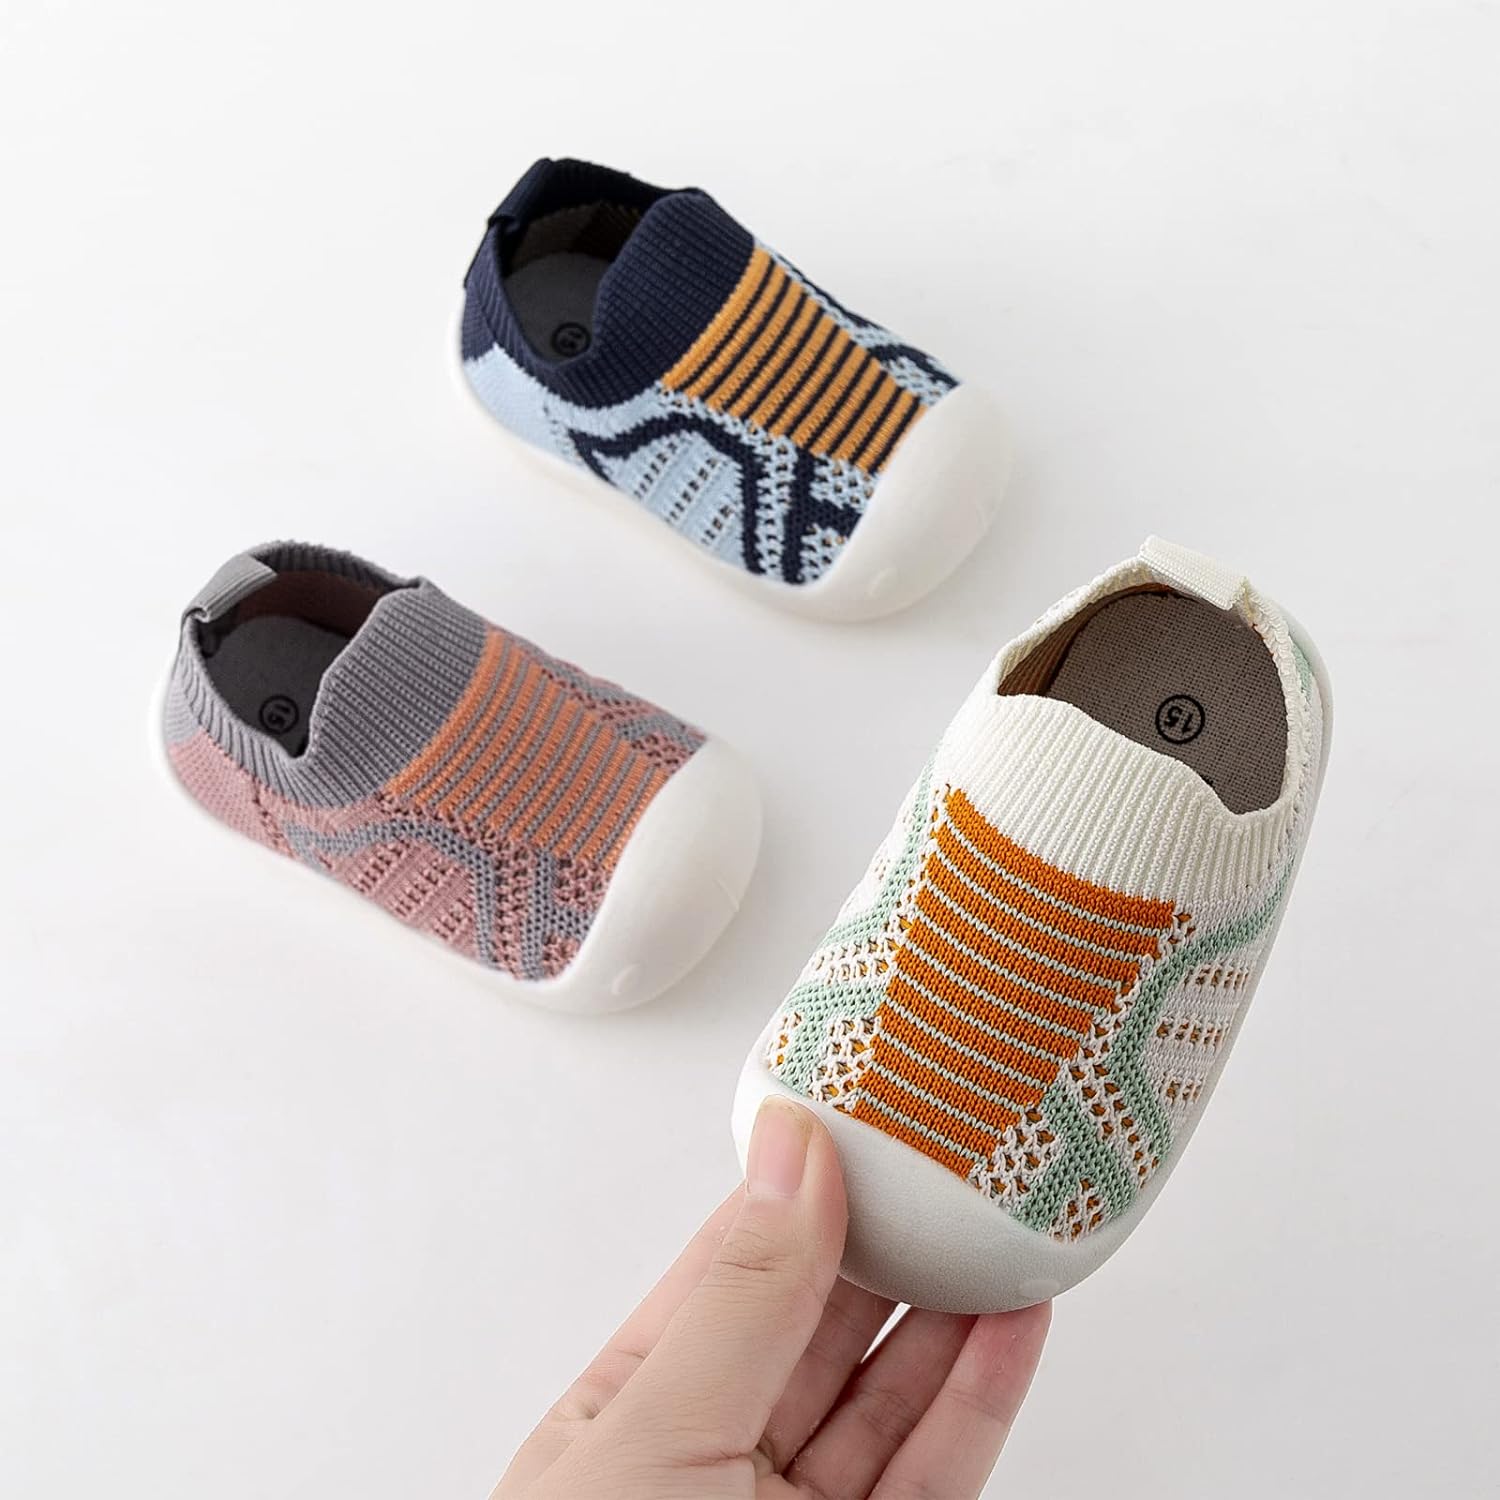 Baby First-Walking Shoes Slip-On Toddler Shoes Non-Skid Infant Sneakers Breathable Cotton Elastic Socks Shoes with Memory Insole for kids Indoor Outdoor Unisex Review 1